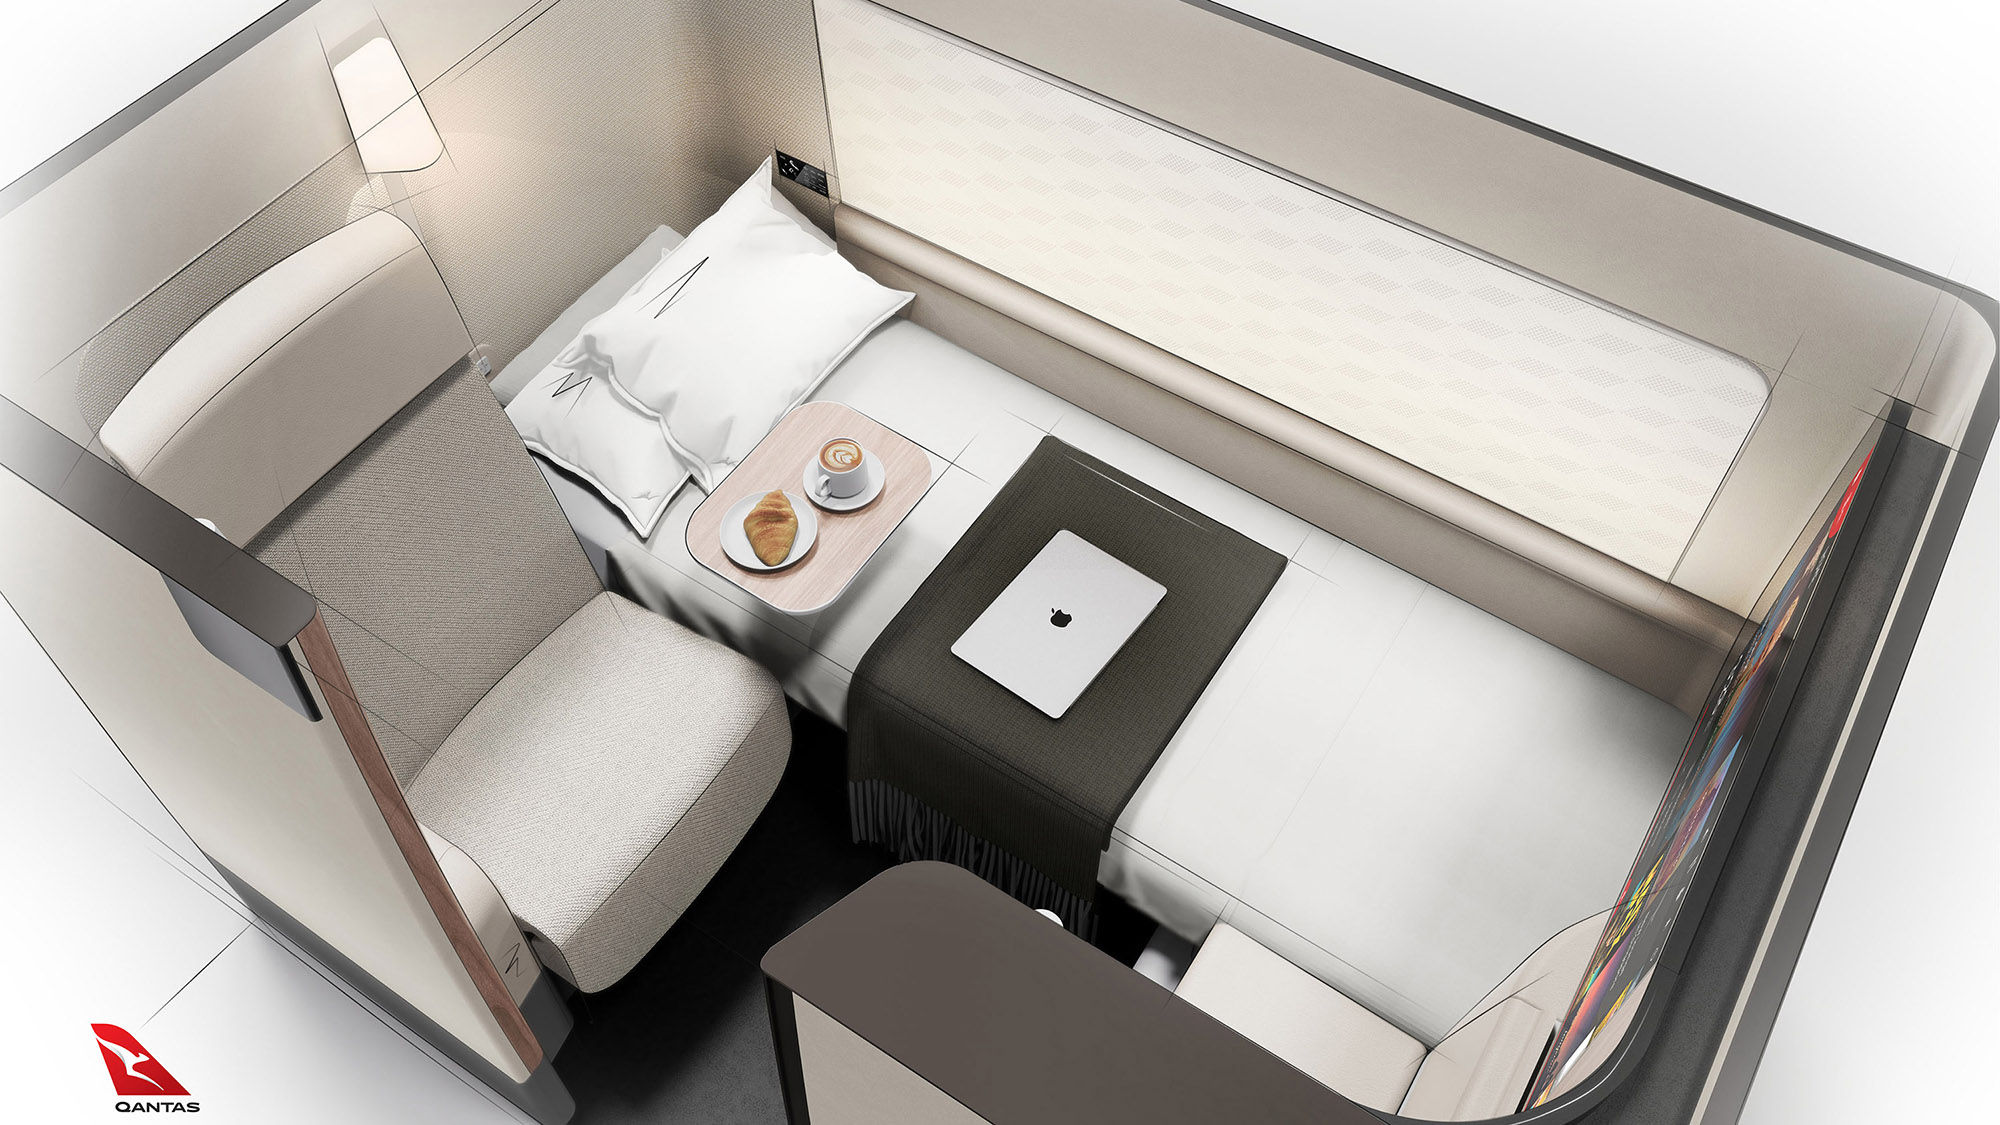 Qantas will equip its Airbus A350-1000s with six first-class suites, shown here in a rendering.